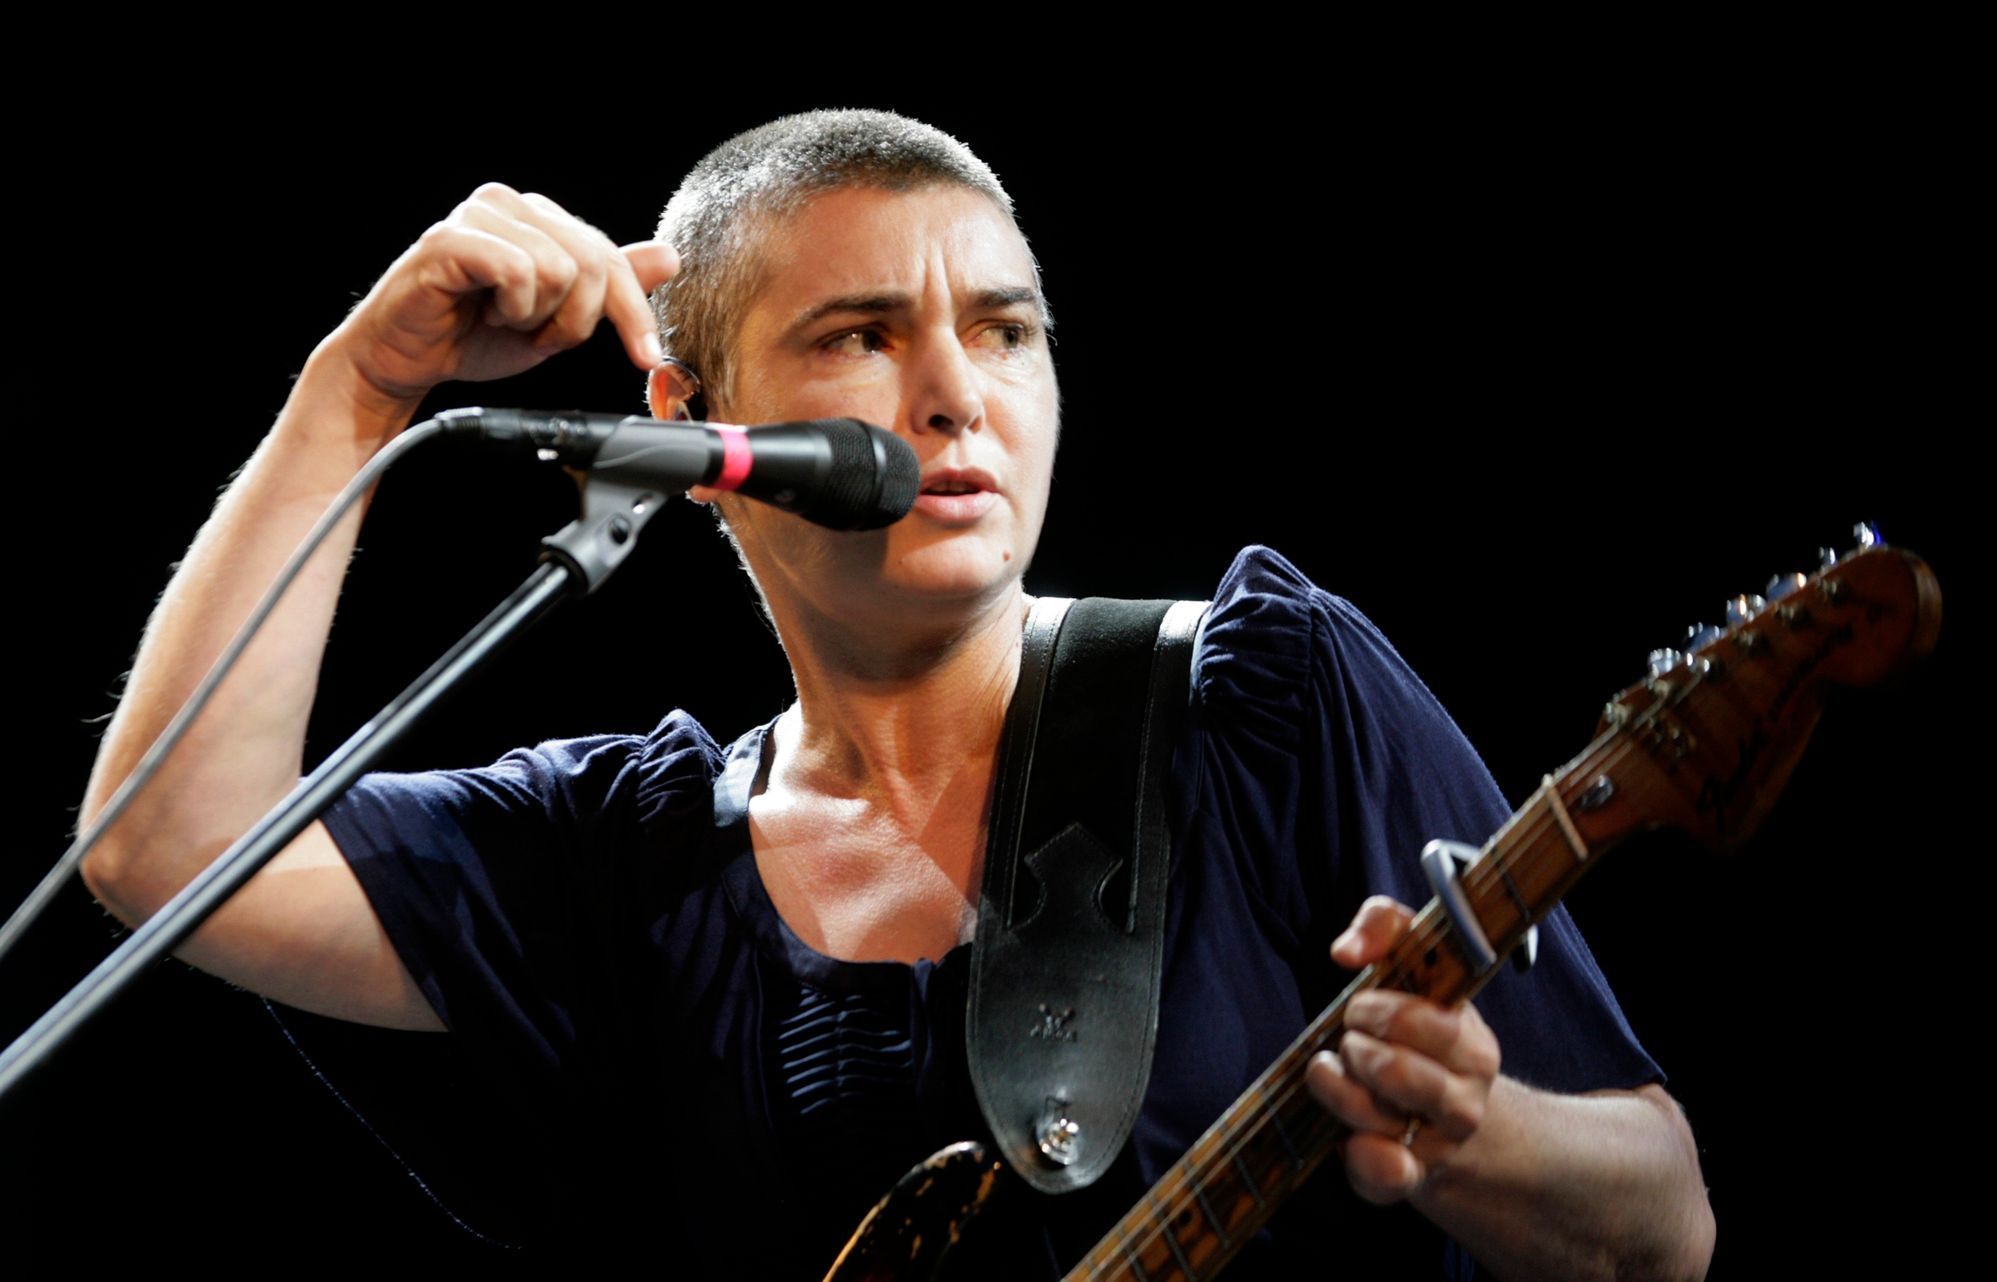 Irish singer Sinead O'Connor performs on stage during the Positivus music festival in Salacgriva